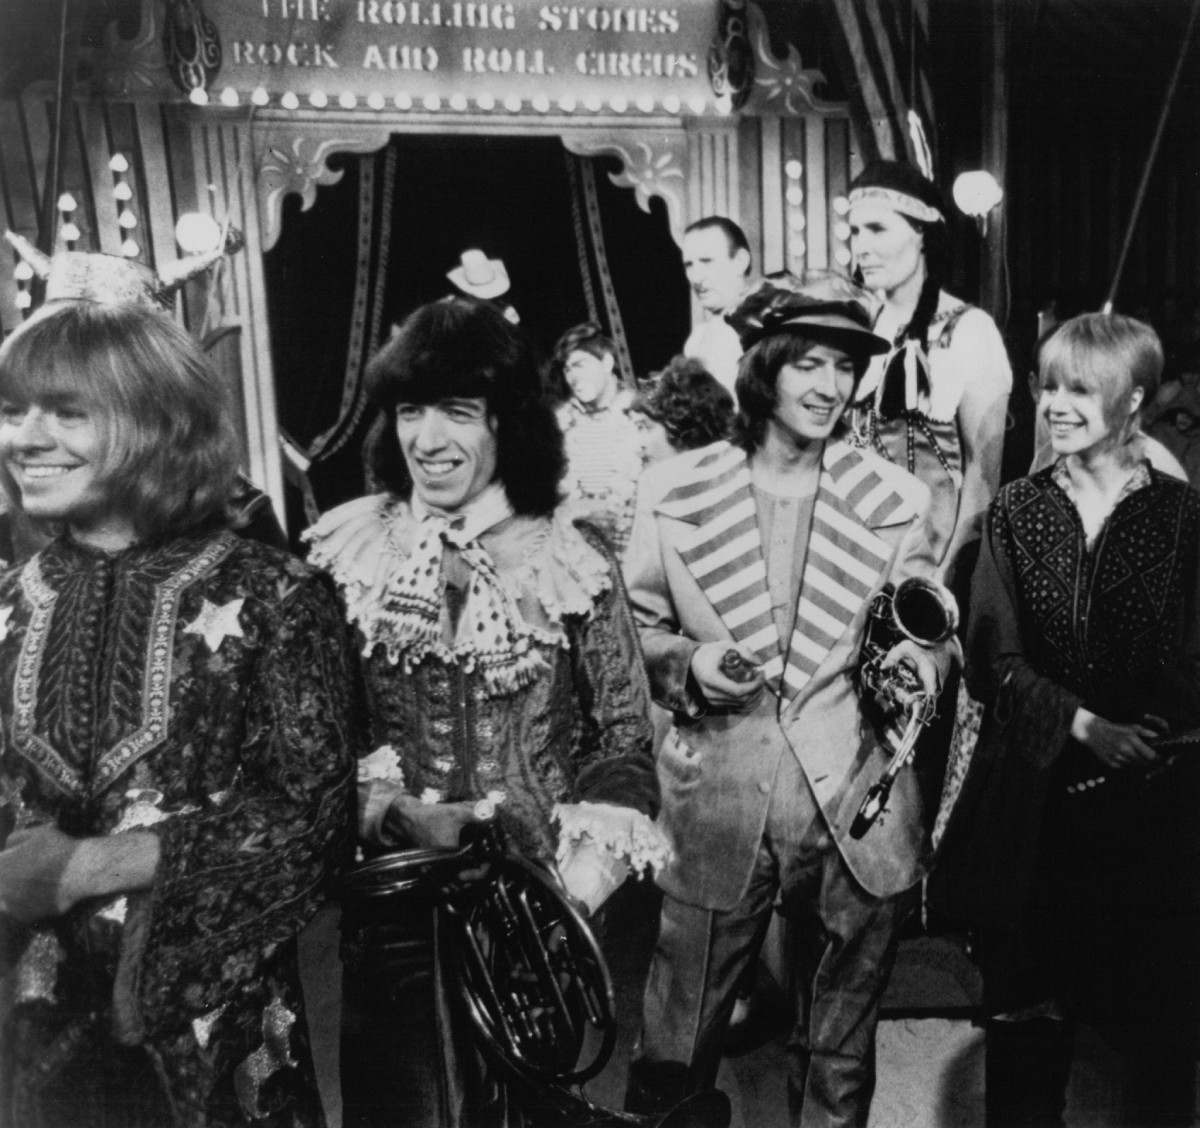 Marianne Faithfull and the Rolling Stones